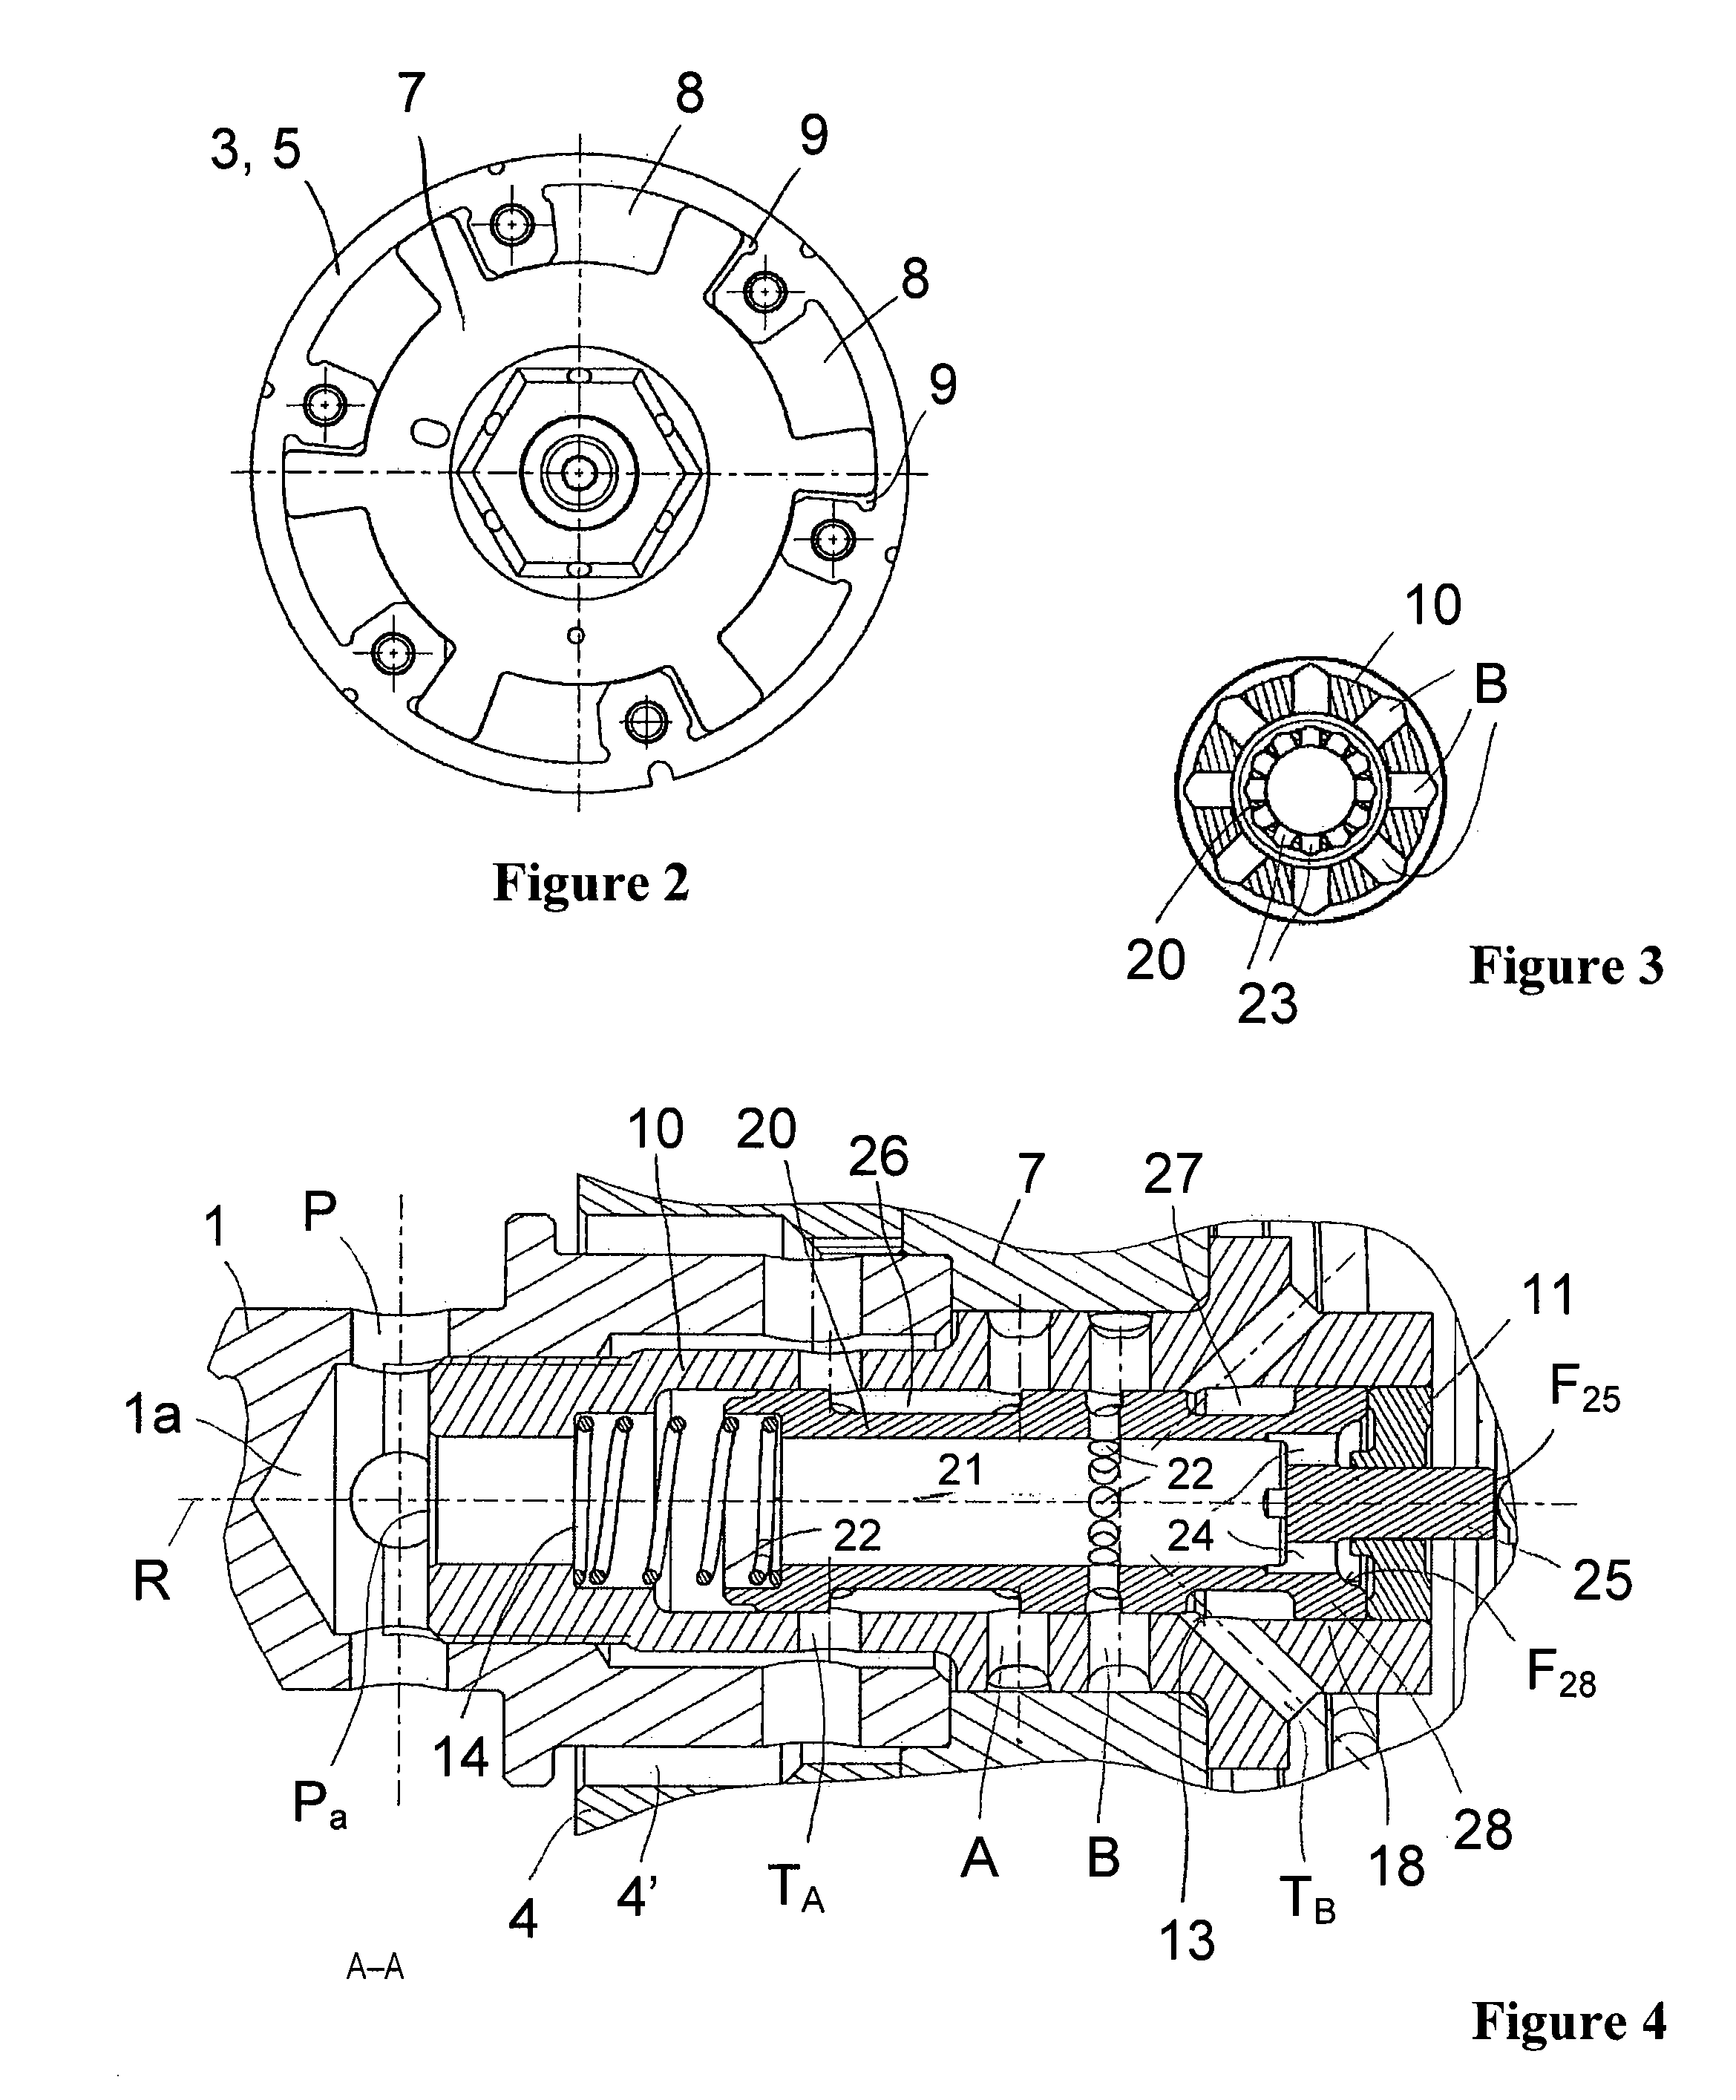 Cam shaft phase setter comprising a control valve for hydraulically adjusting the phase position of a cam shaft